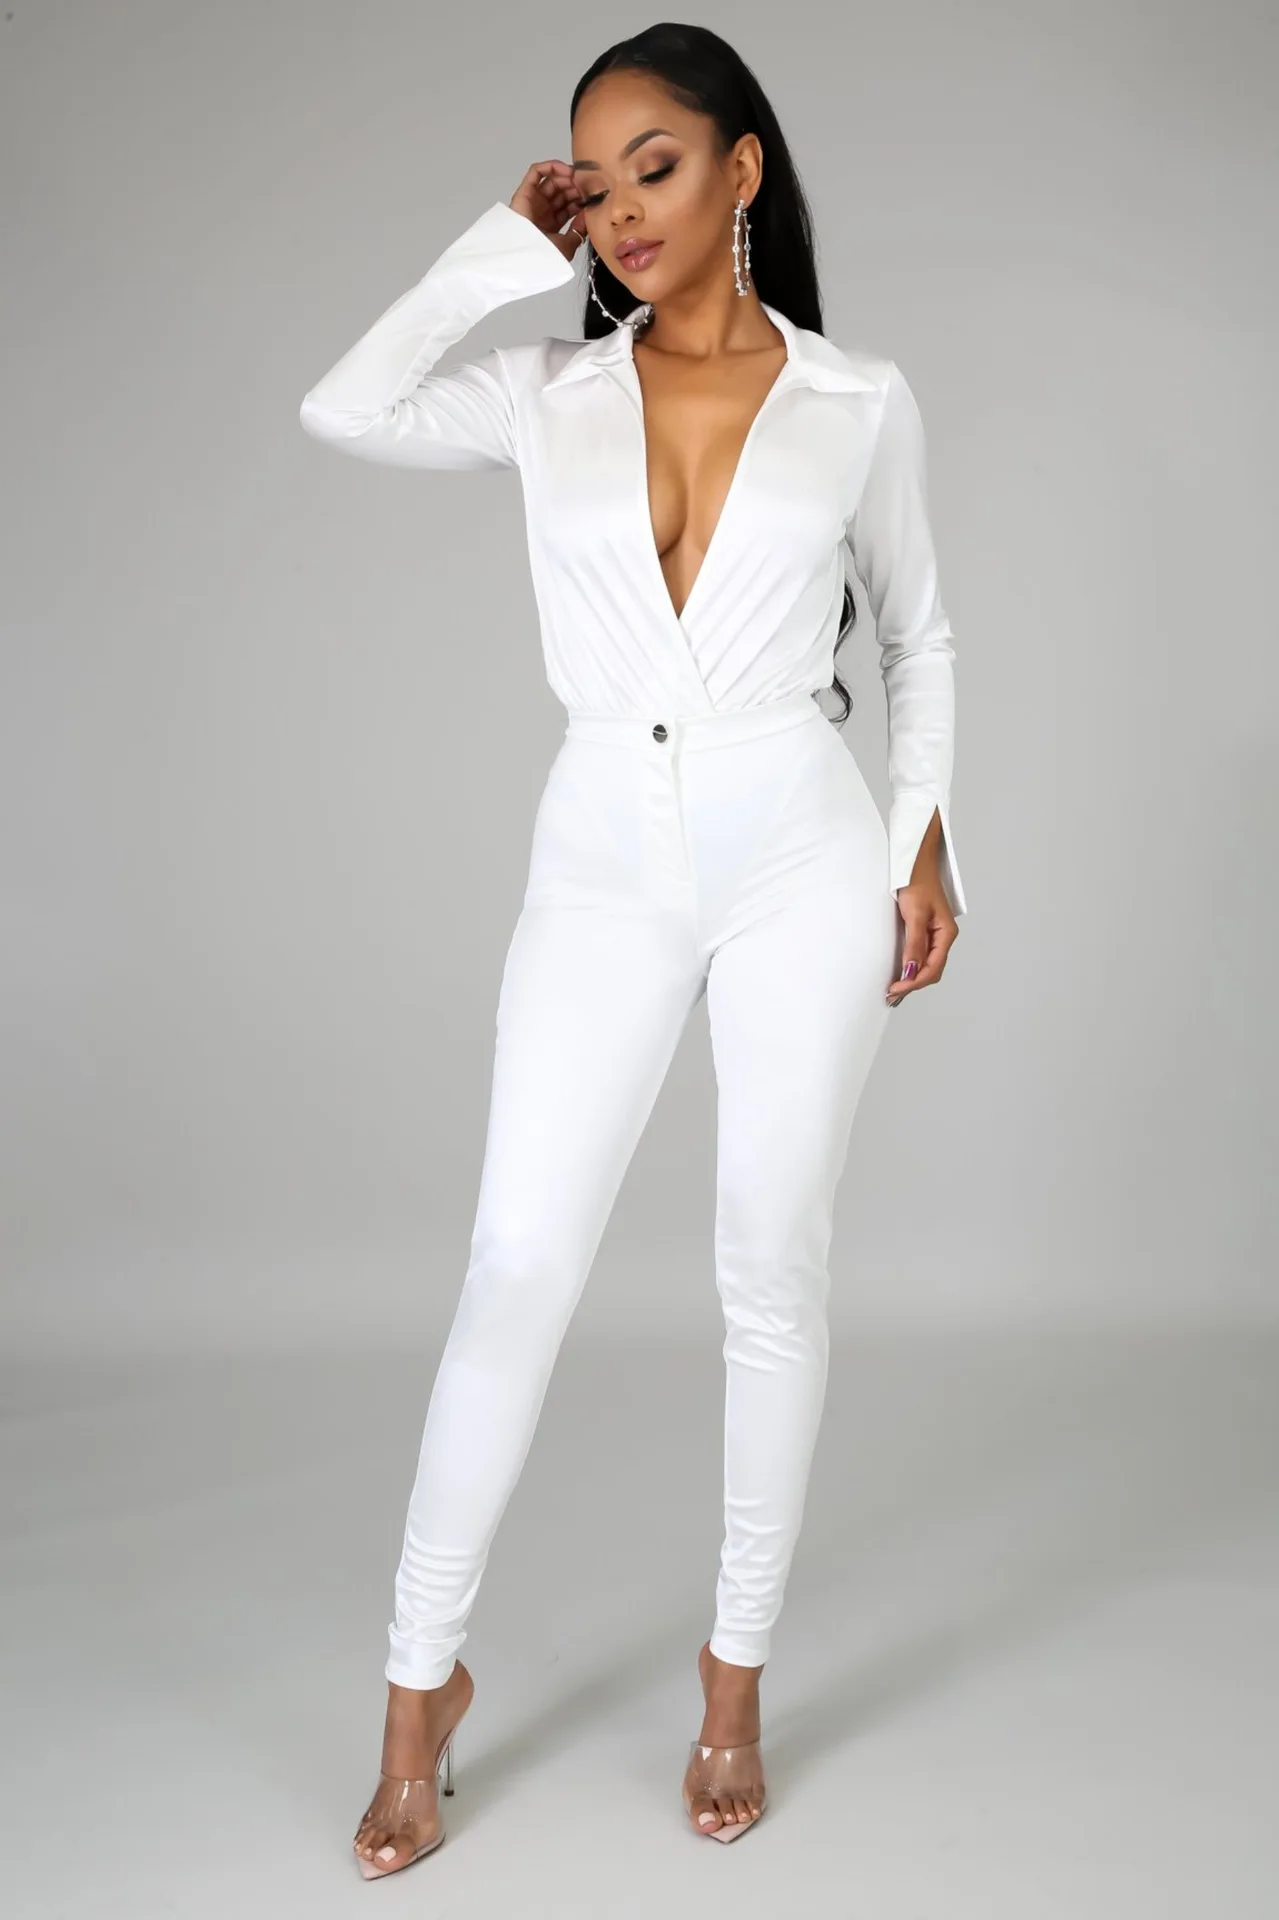 New Style Women Aexy V Neck Long Sleeve Satin 2 Two Piece Set Shirt Blouse And Pants Suit formal pant suits Suits & Blazers